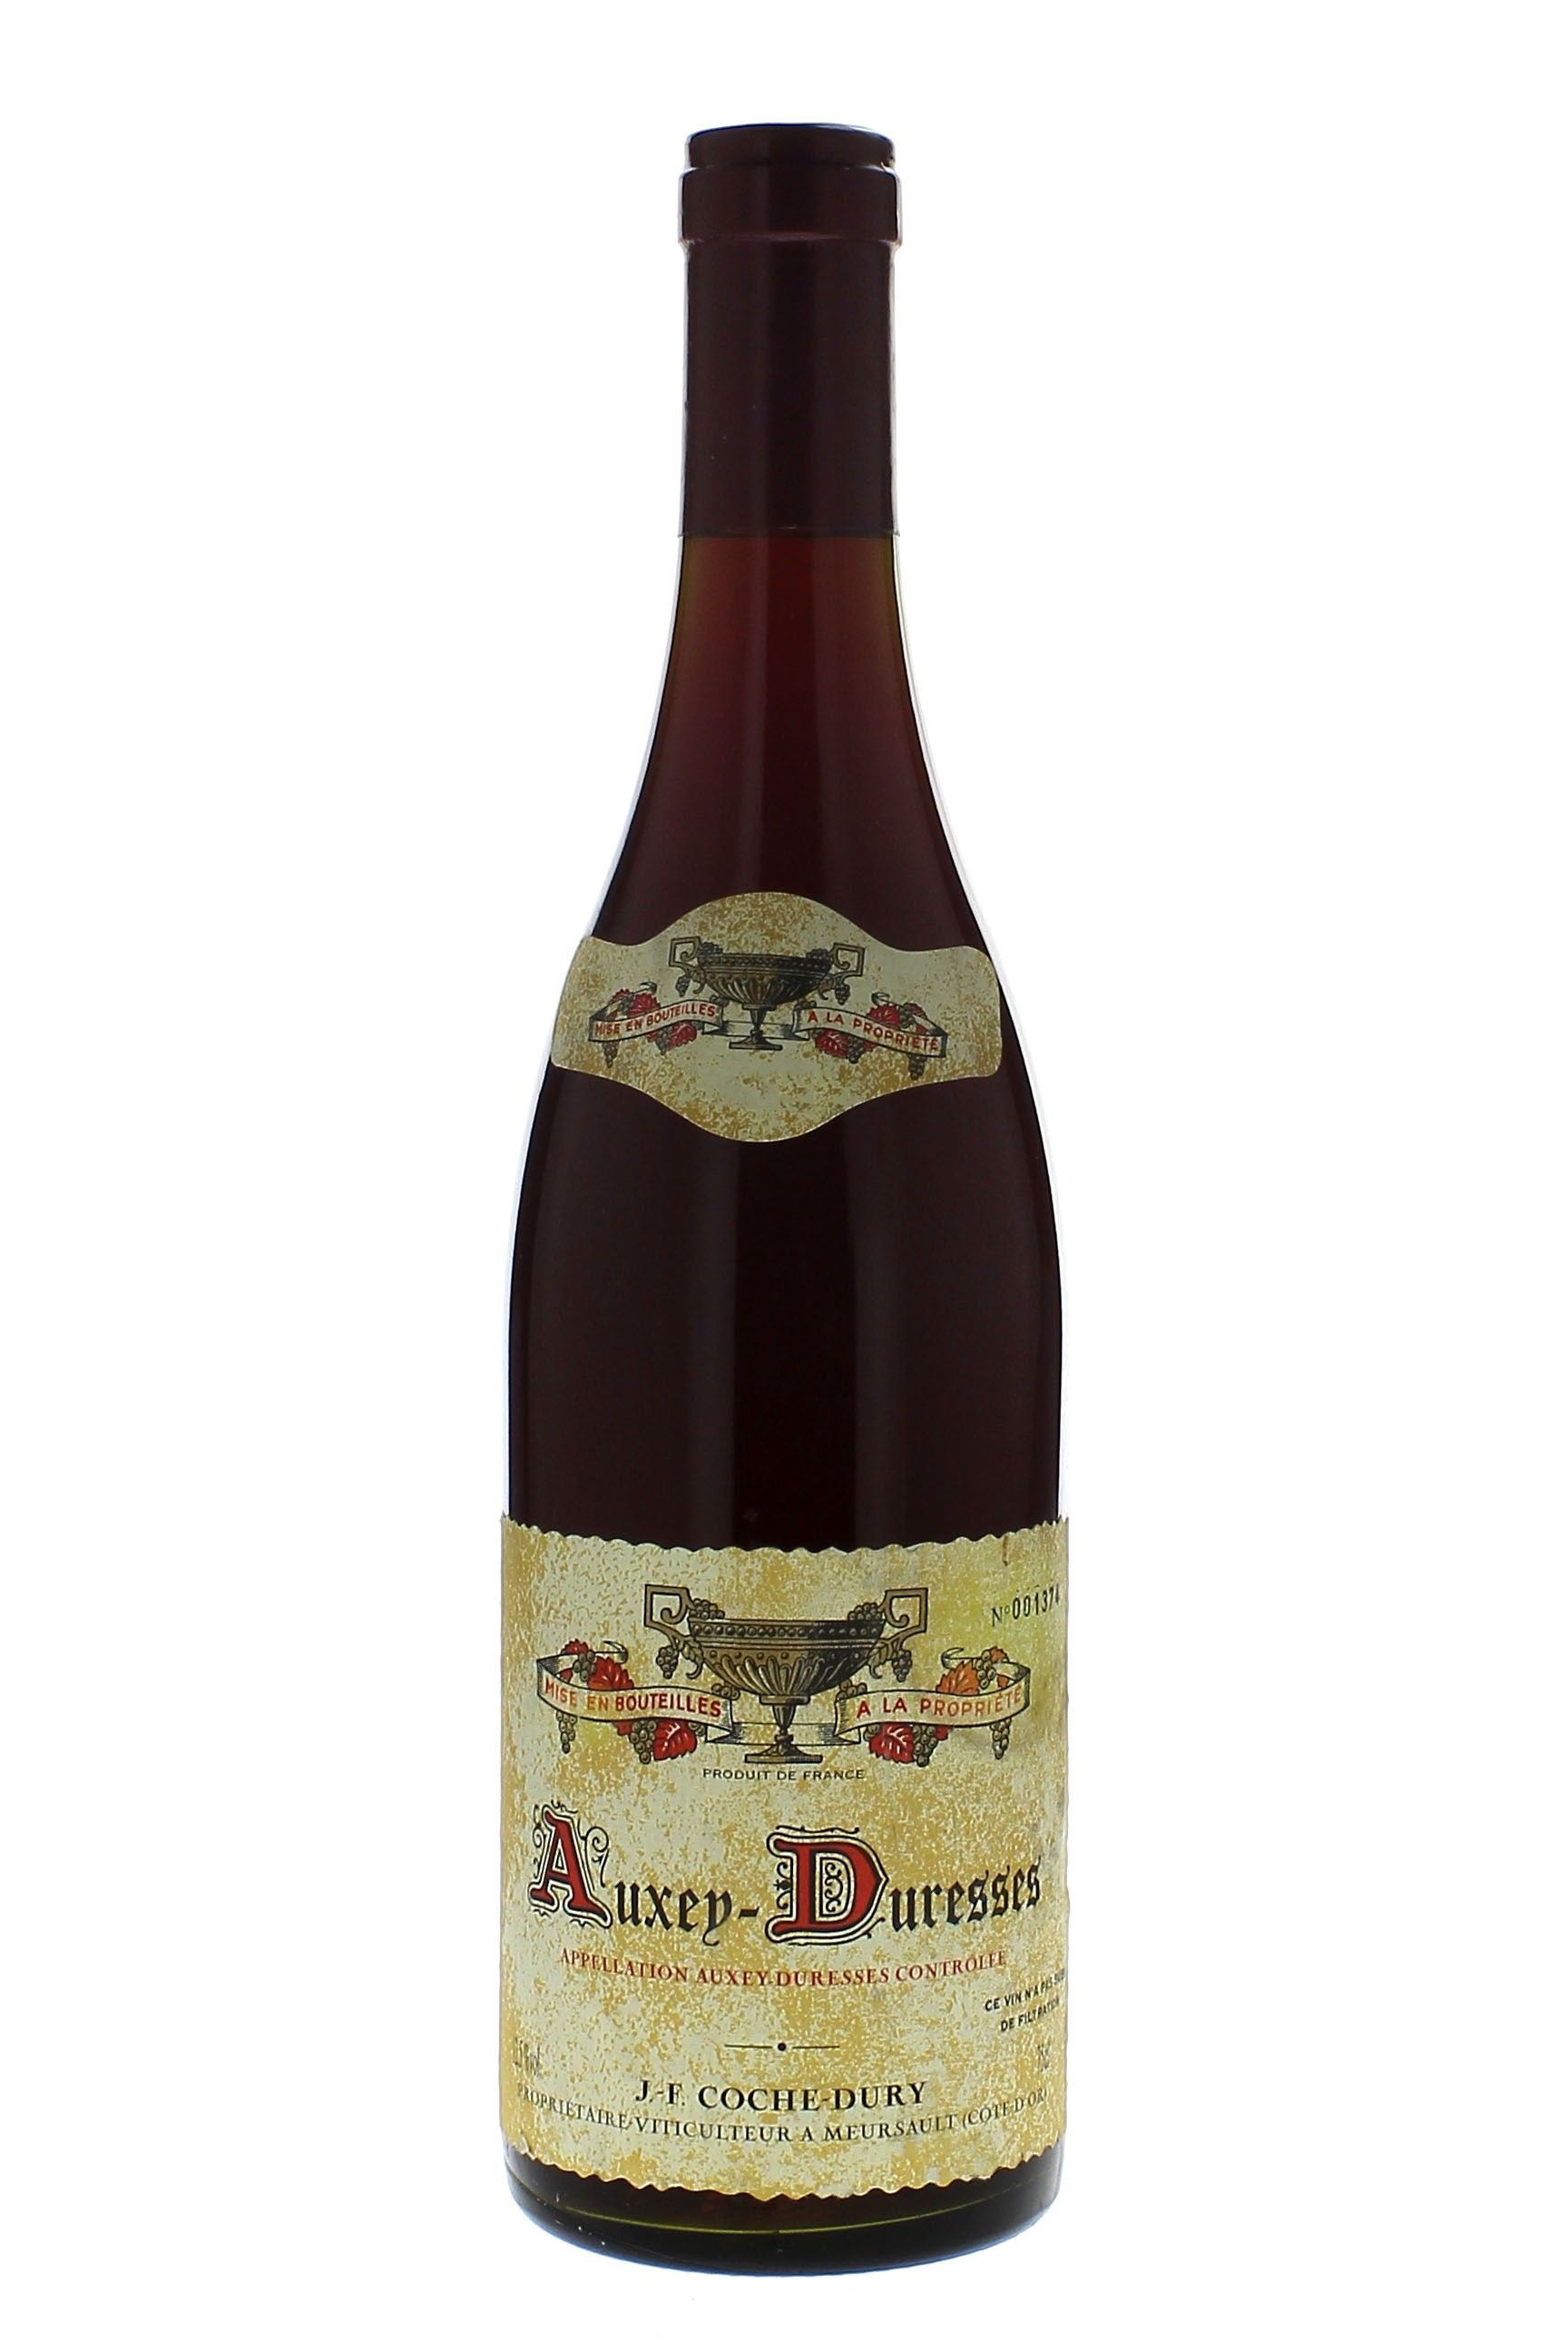 Auxey duresses 2008 Domaine COCHE DURY, Bourgogne rouge